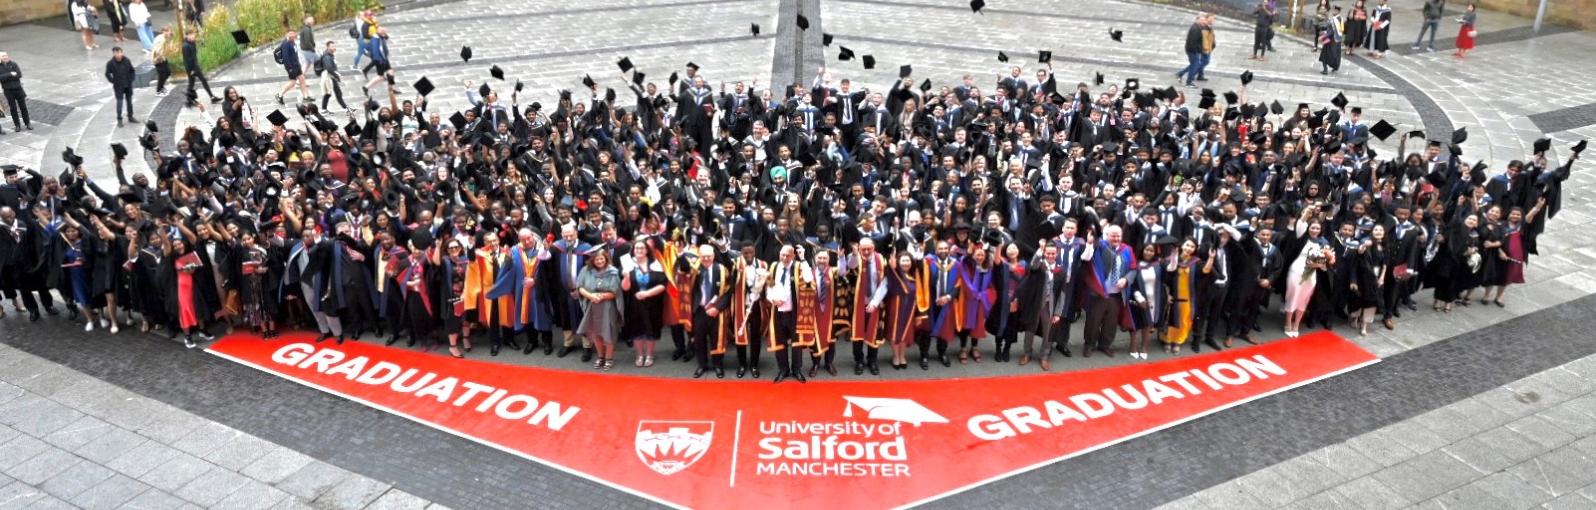 Graduates posing for photograph outside The Lowry Theatre at Salford Quays